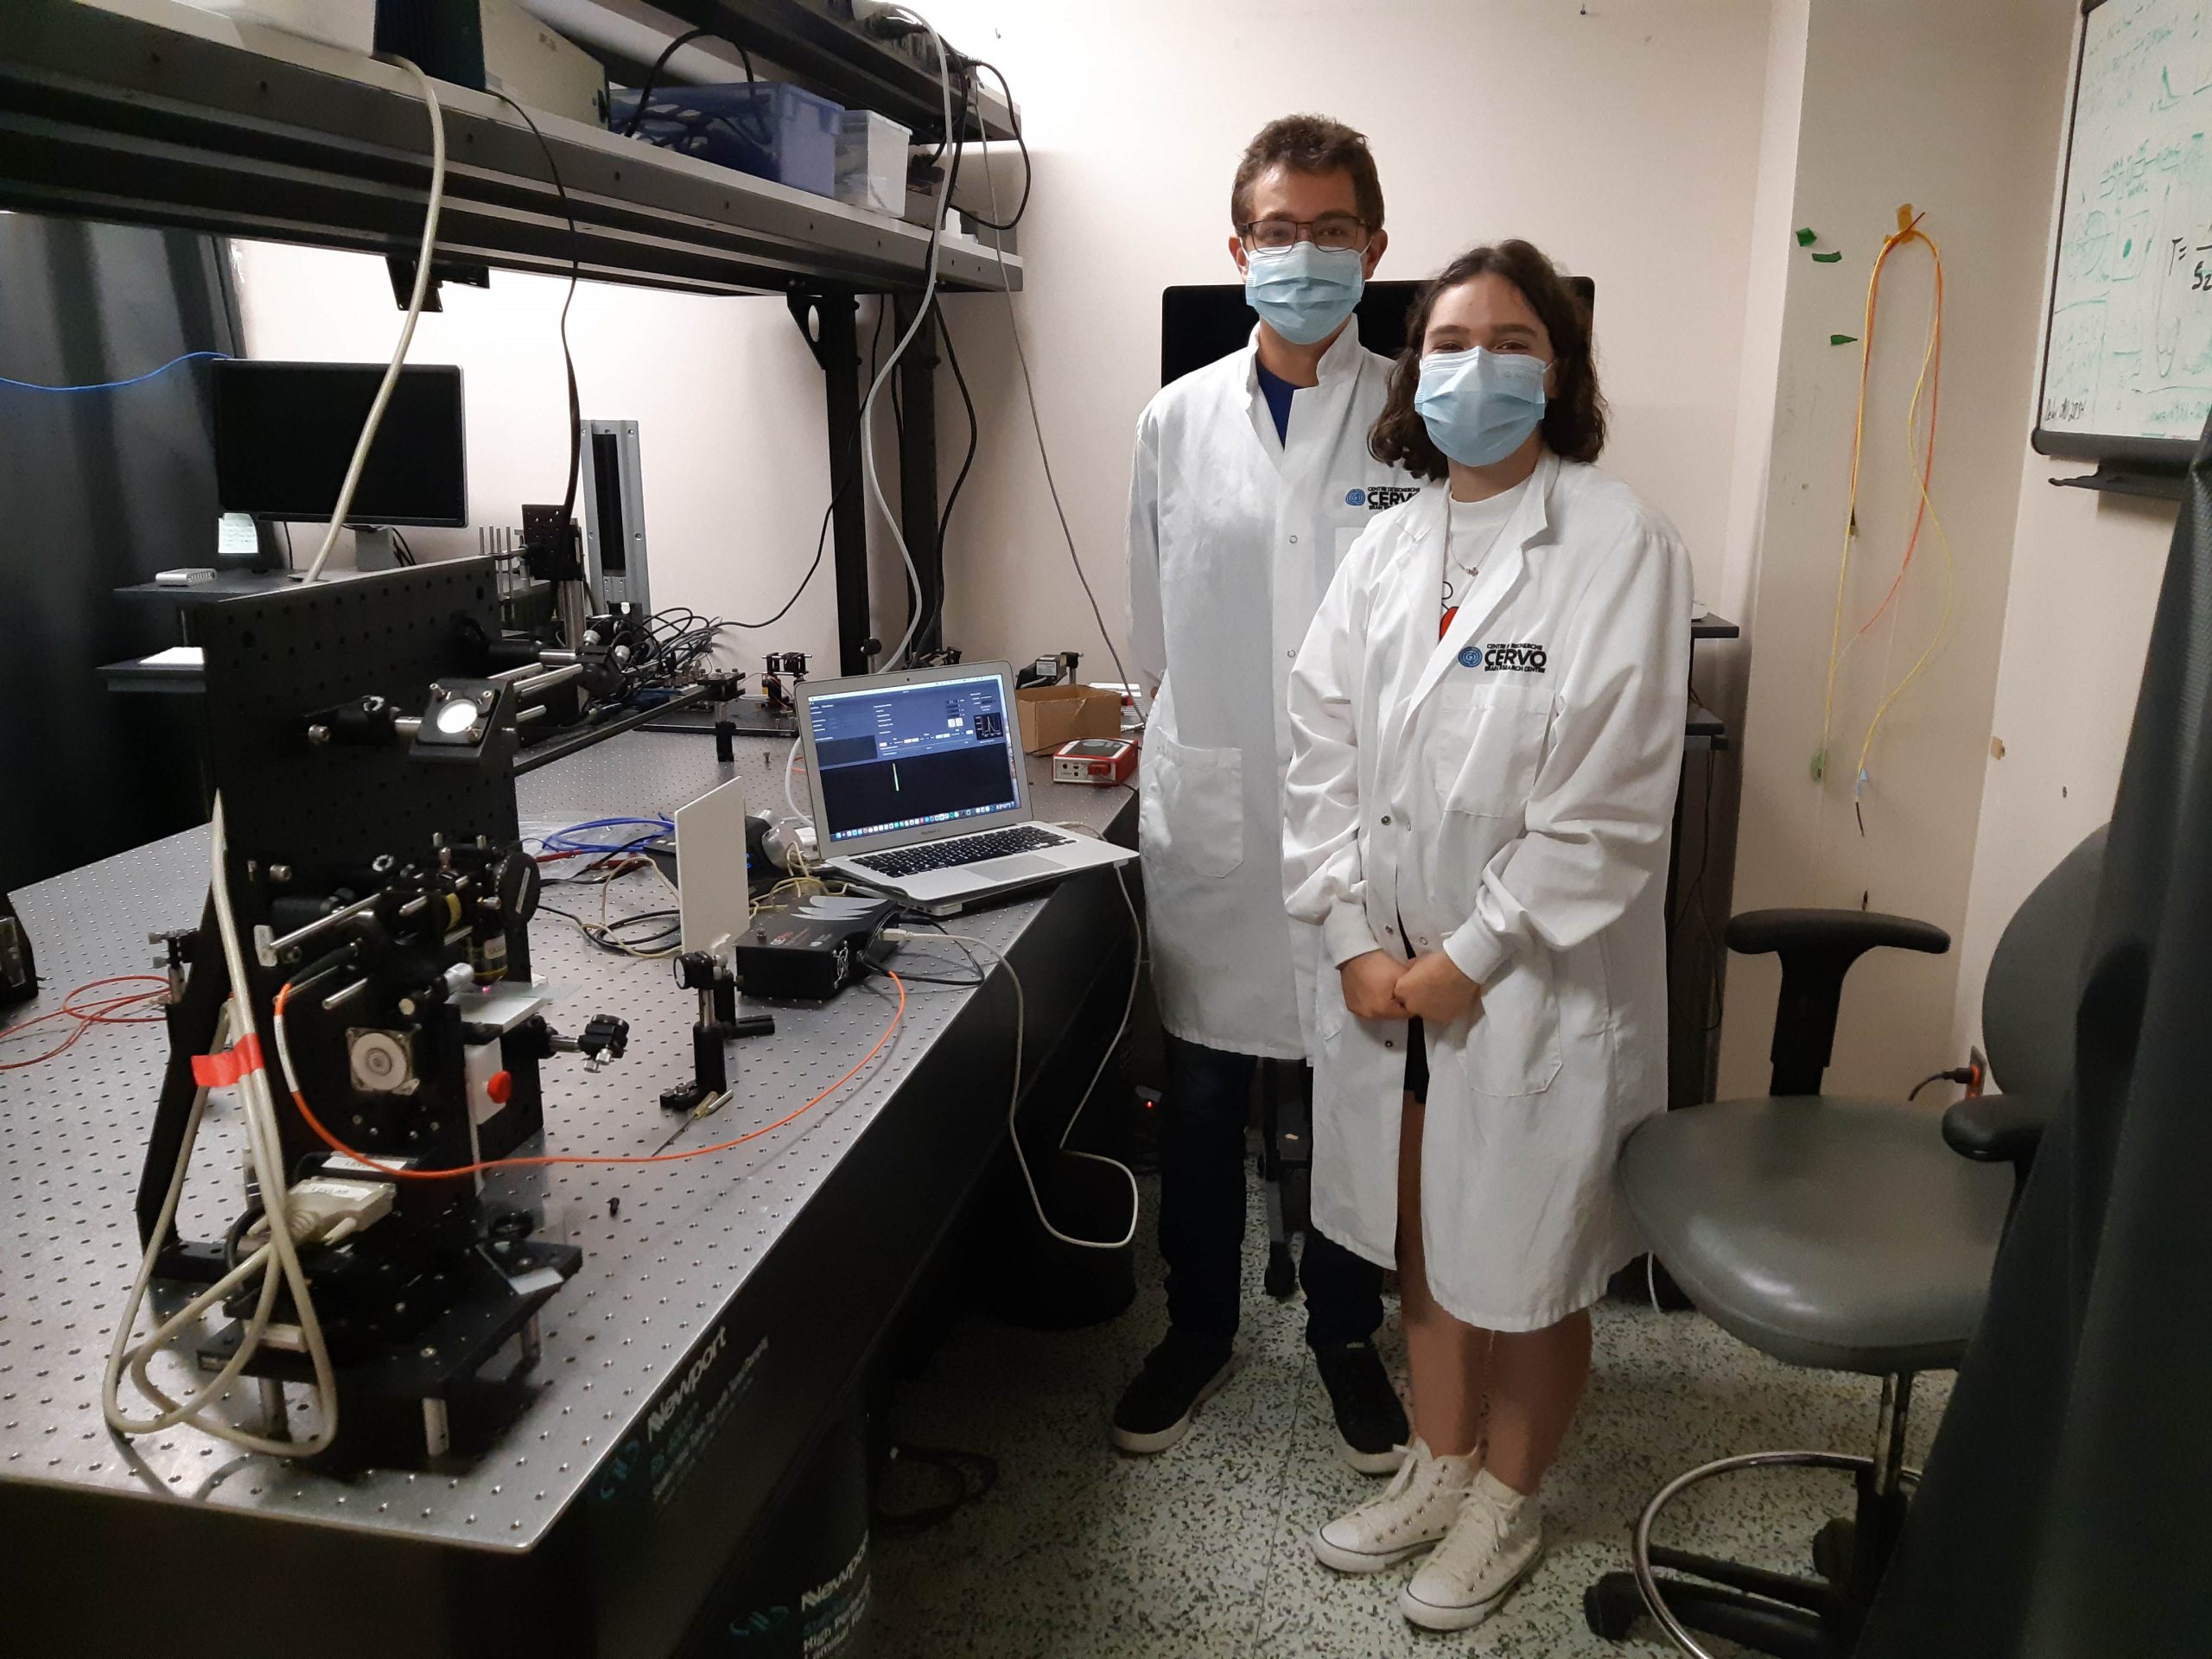 The hyperspectral Raman microscope of our trainees Justine and Benjamin is making great progress!